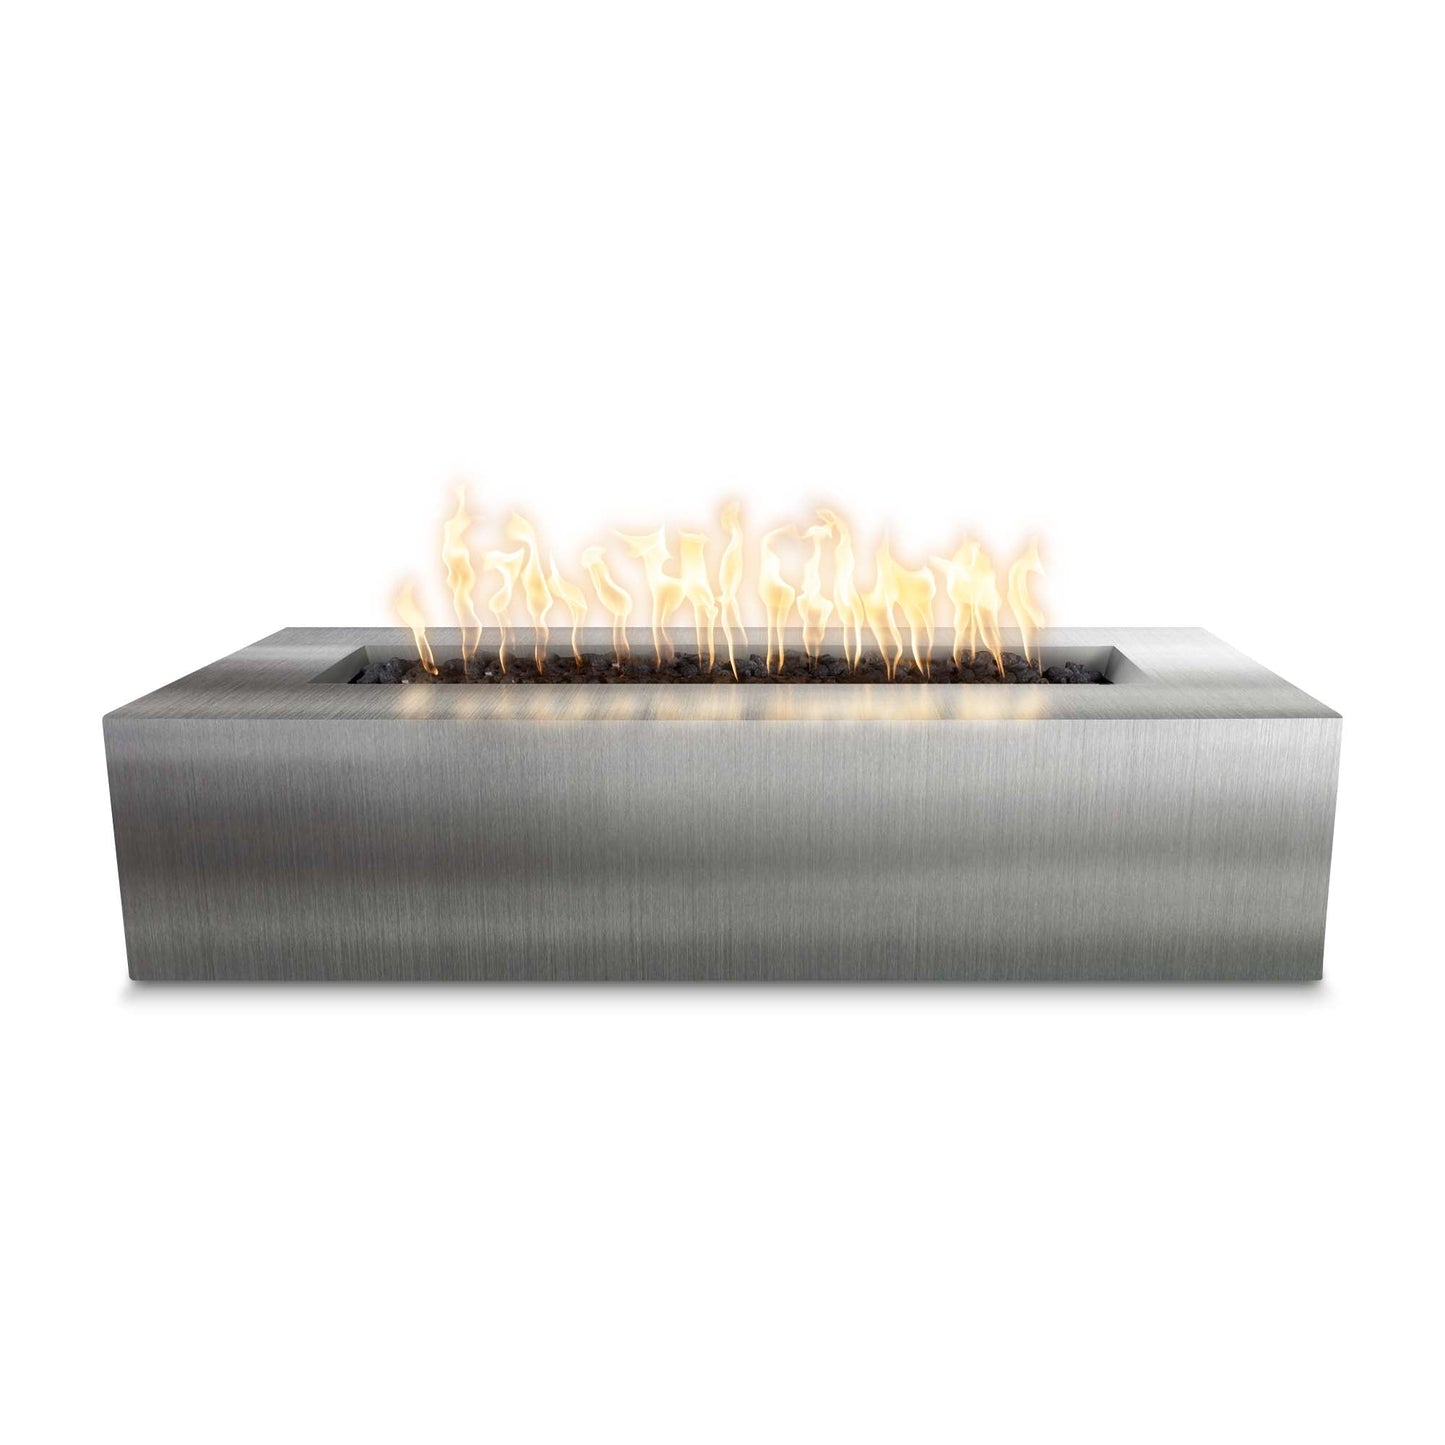 The Outdoor Plus Rectangular Regal 60" Corten Steel Liquid Propane Fire Pit with Flame Sense with Spark Ignition